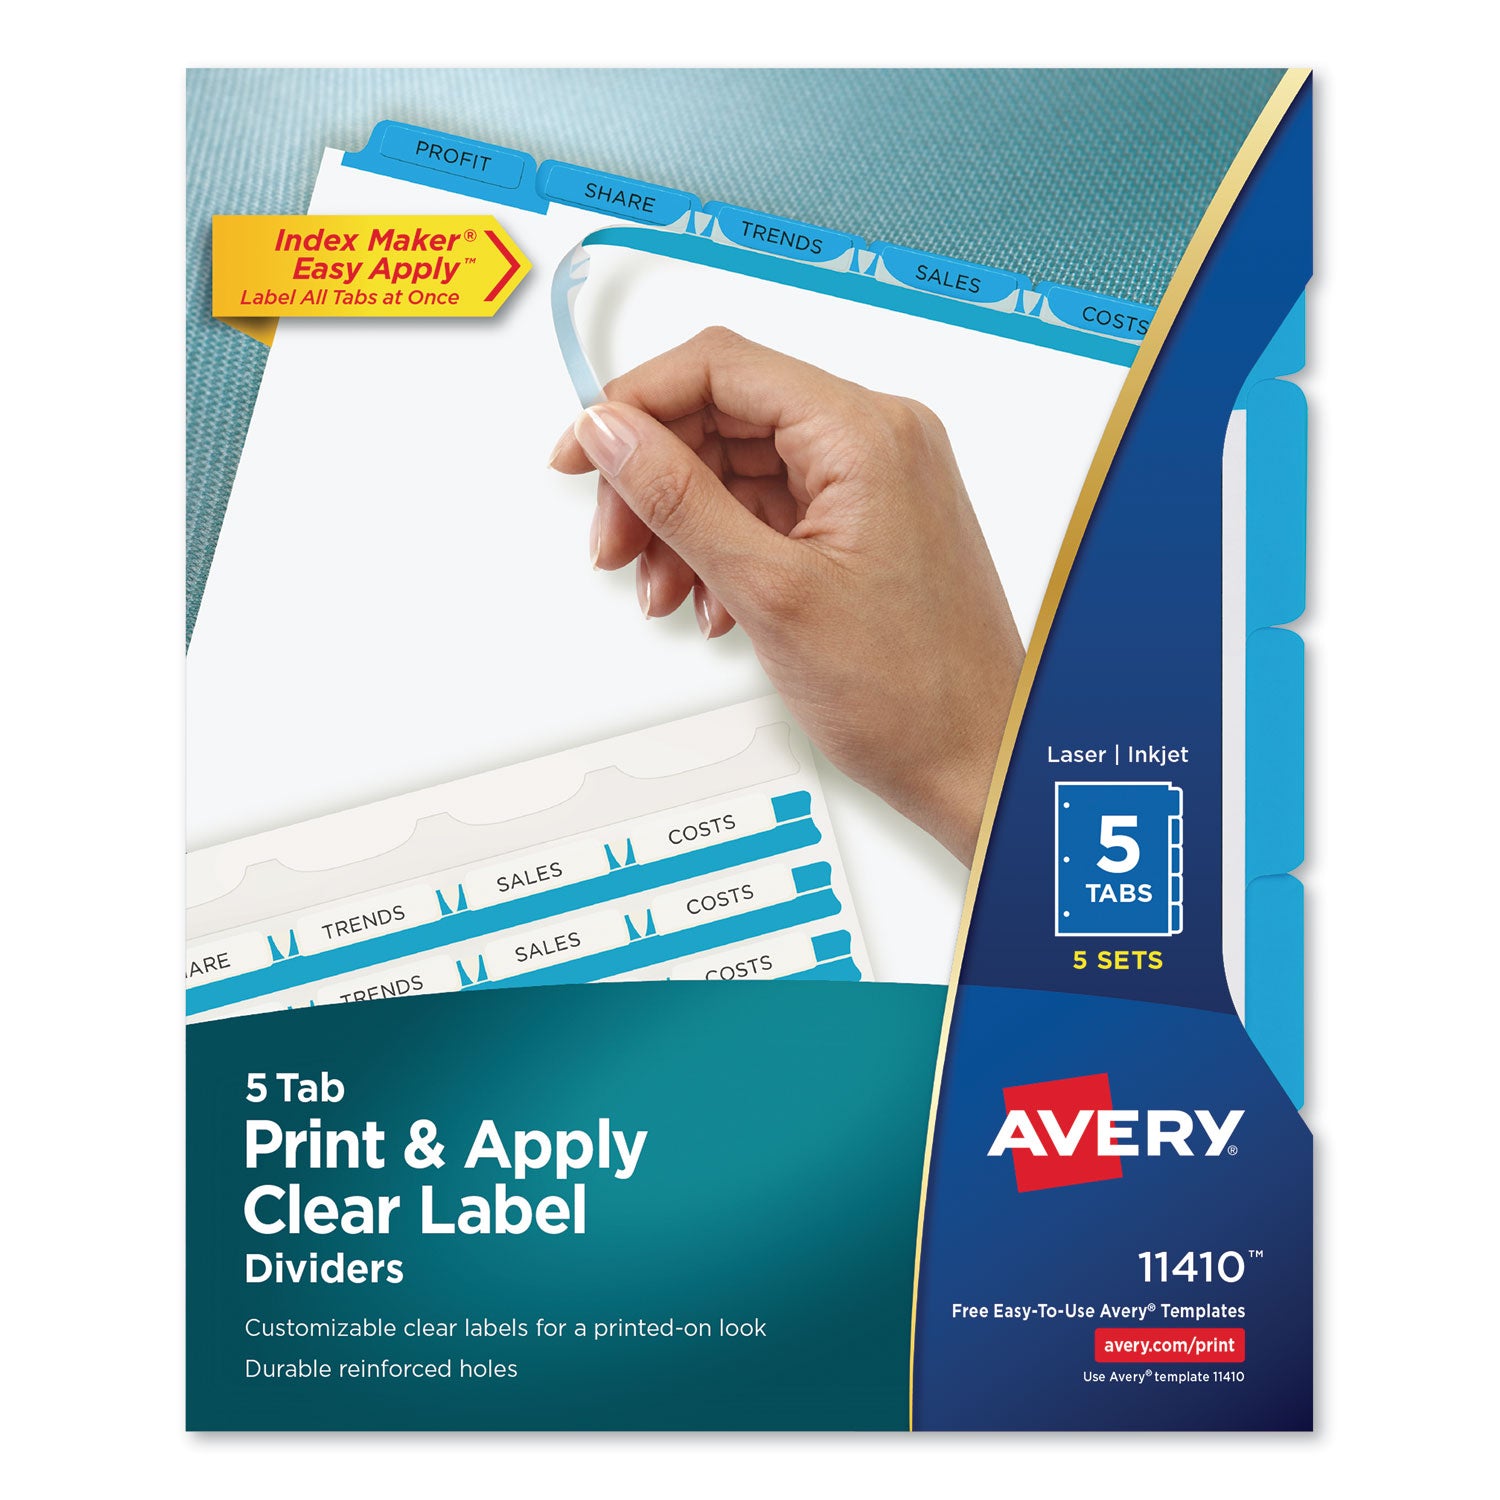 Print and Apply Index Maker Clear Label Dividers, 5-Tab, Color Tabs, 11 x 8.5, White, Blue Tabs, 5 Sets - 